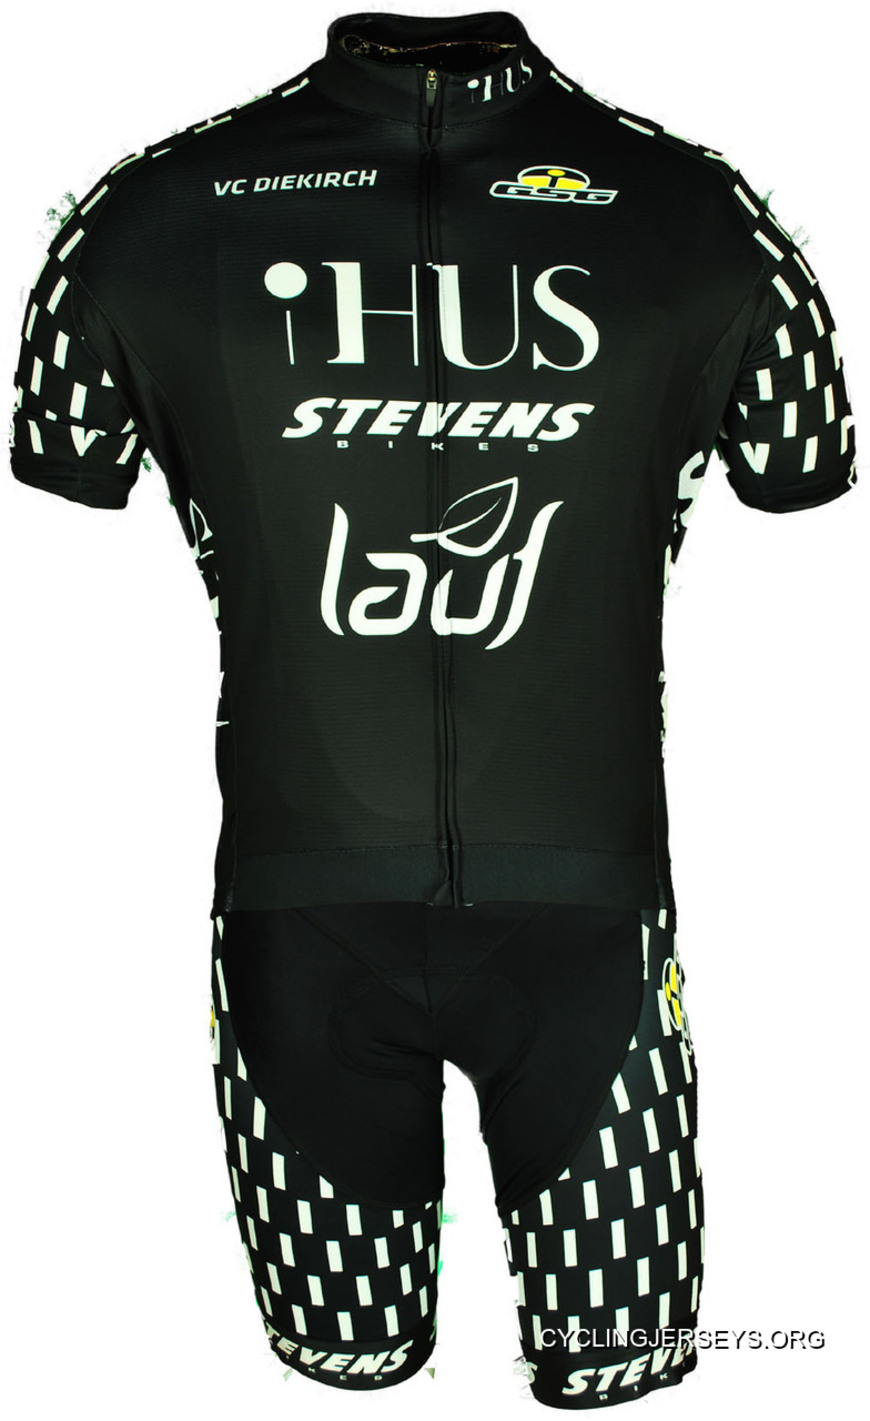 2016 IHus Stevens FZ Jersey Cheap To Buy